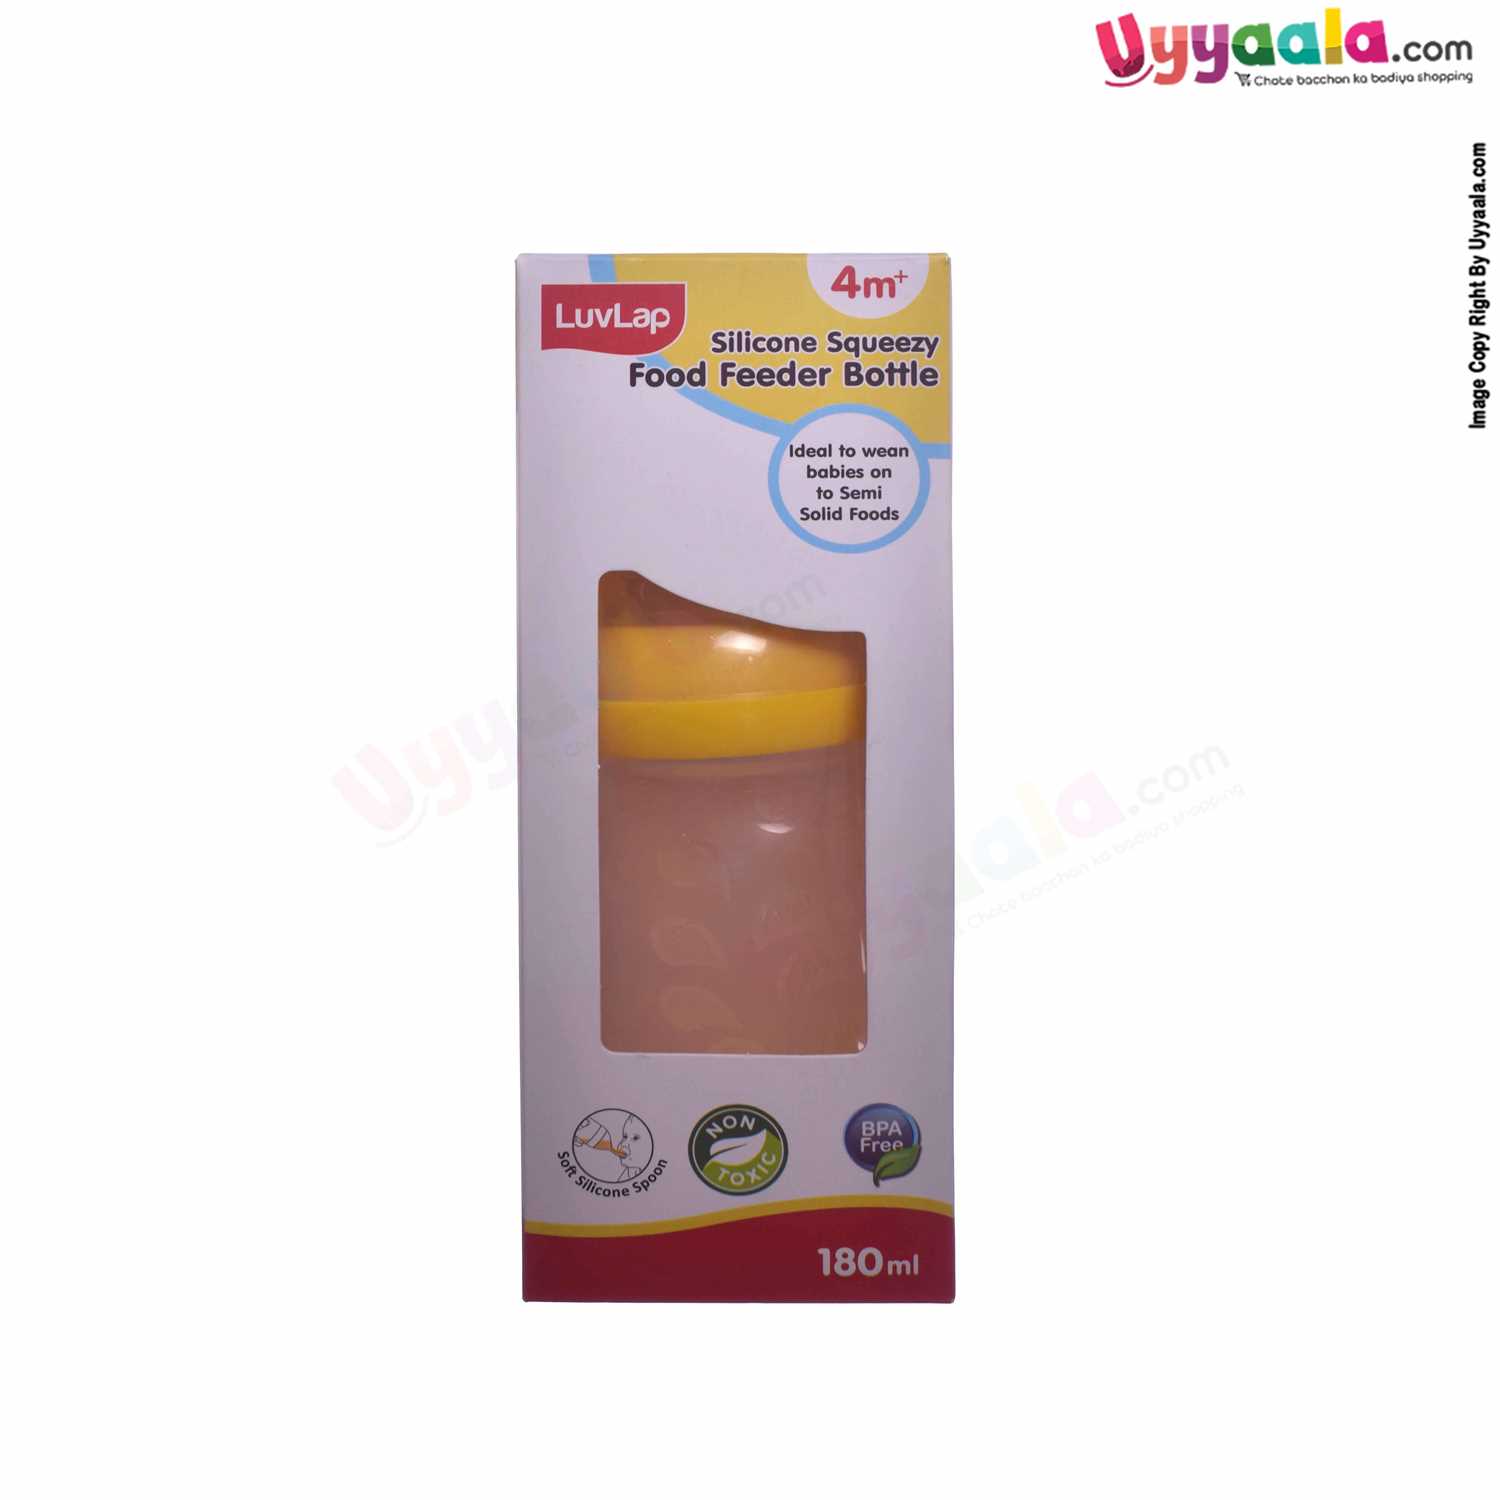 LUVLAP Squeezy Baby Bottle Feeder with Silicone Spoon Tip, 180ml, 4m+age - Yellow